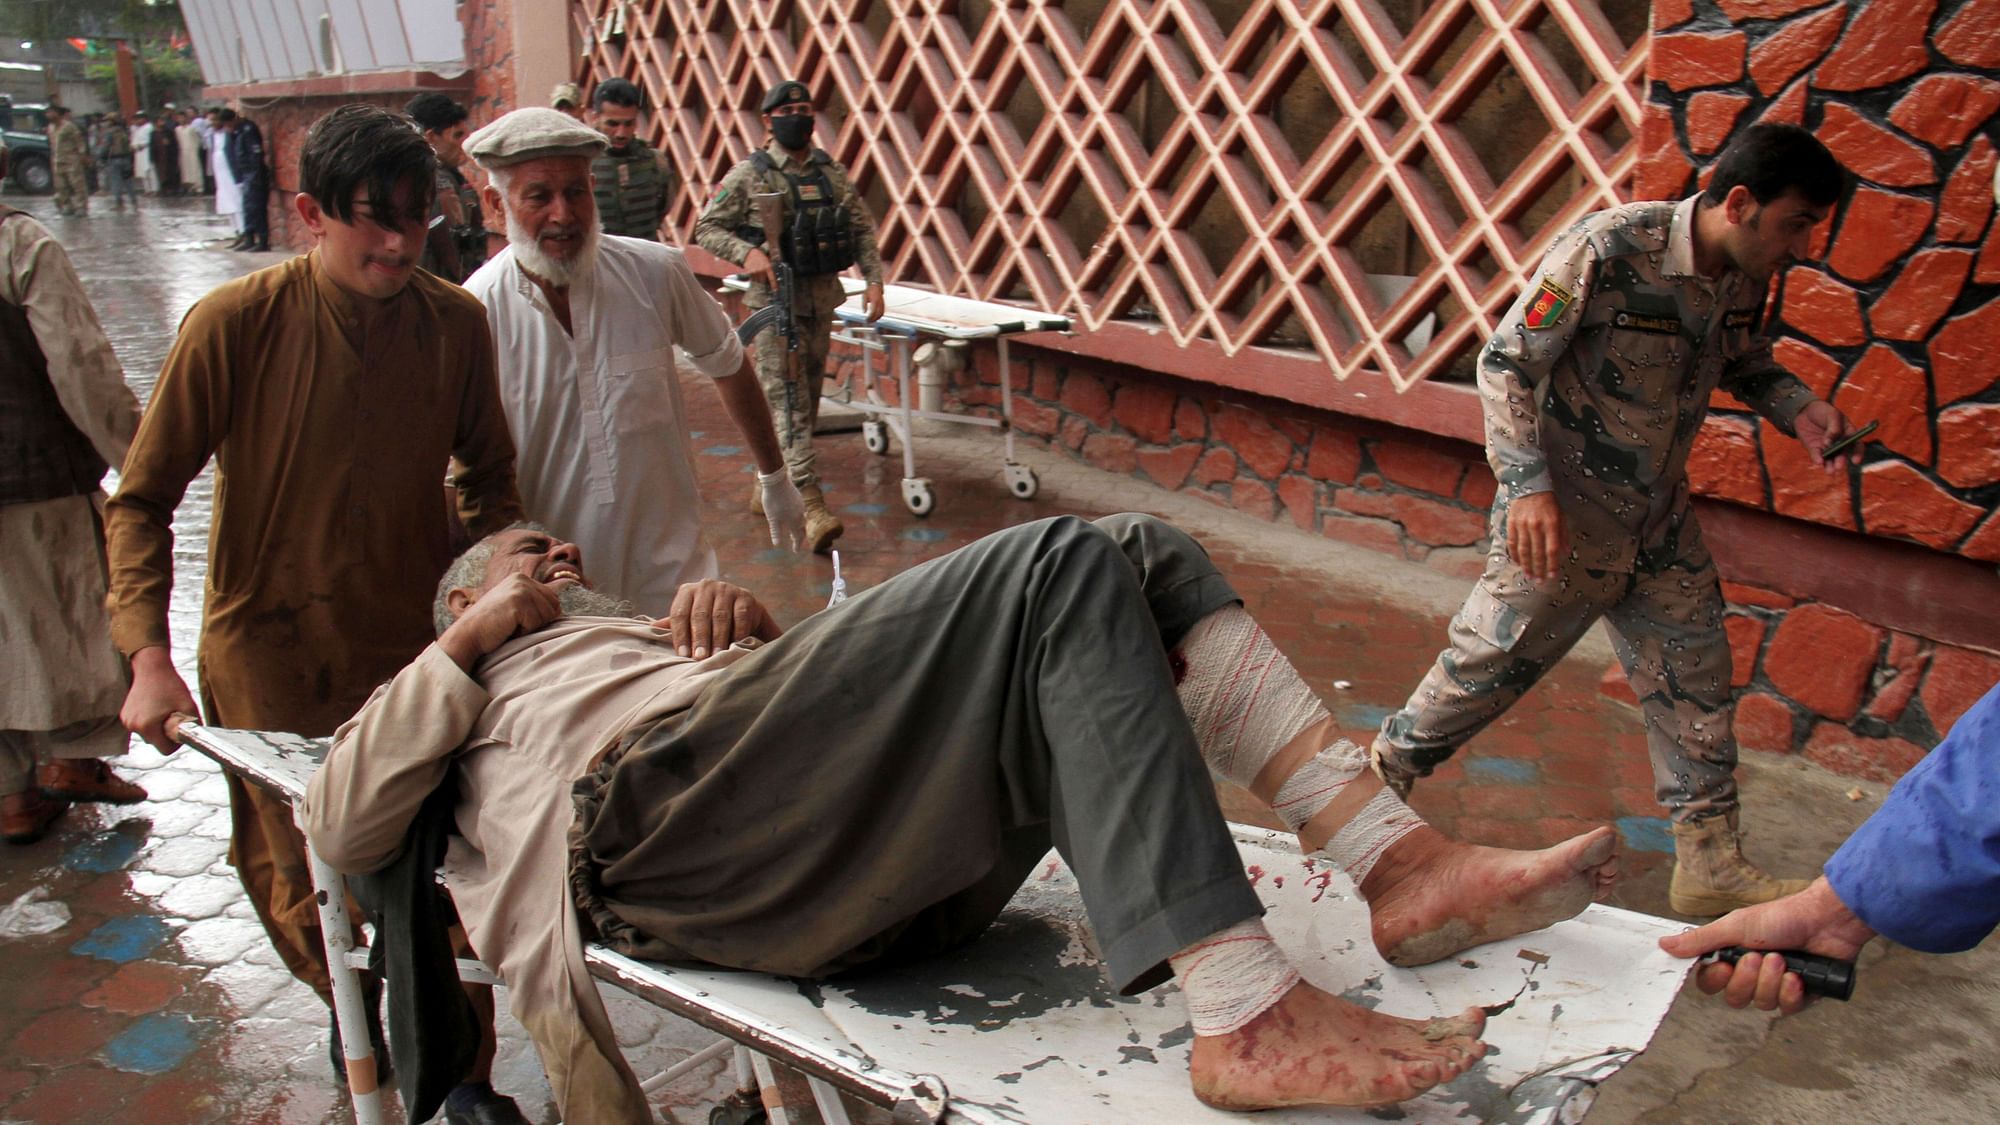 An explosion at a mosque in Afghanistan has killed 62 worshippers.